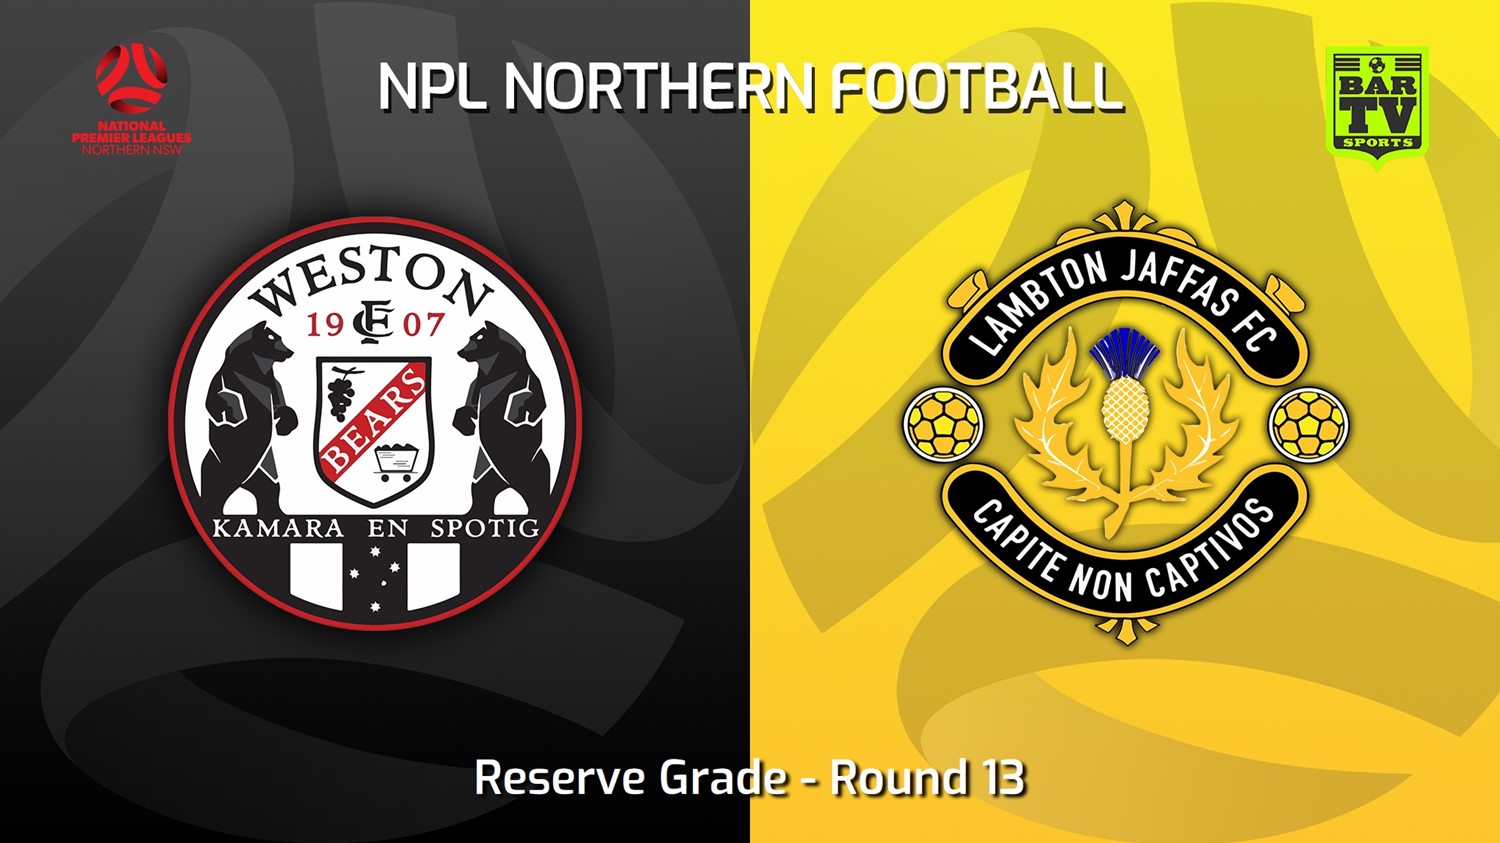 230528-NNSW NPLM Res Round 13 - Weston Workers FC Res v Lambton Jaffas FC Res Minigame Slate Image